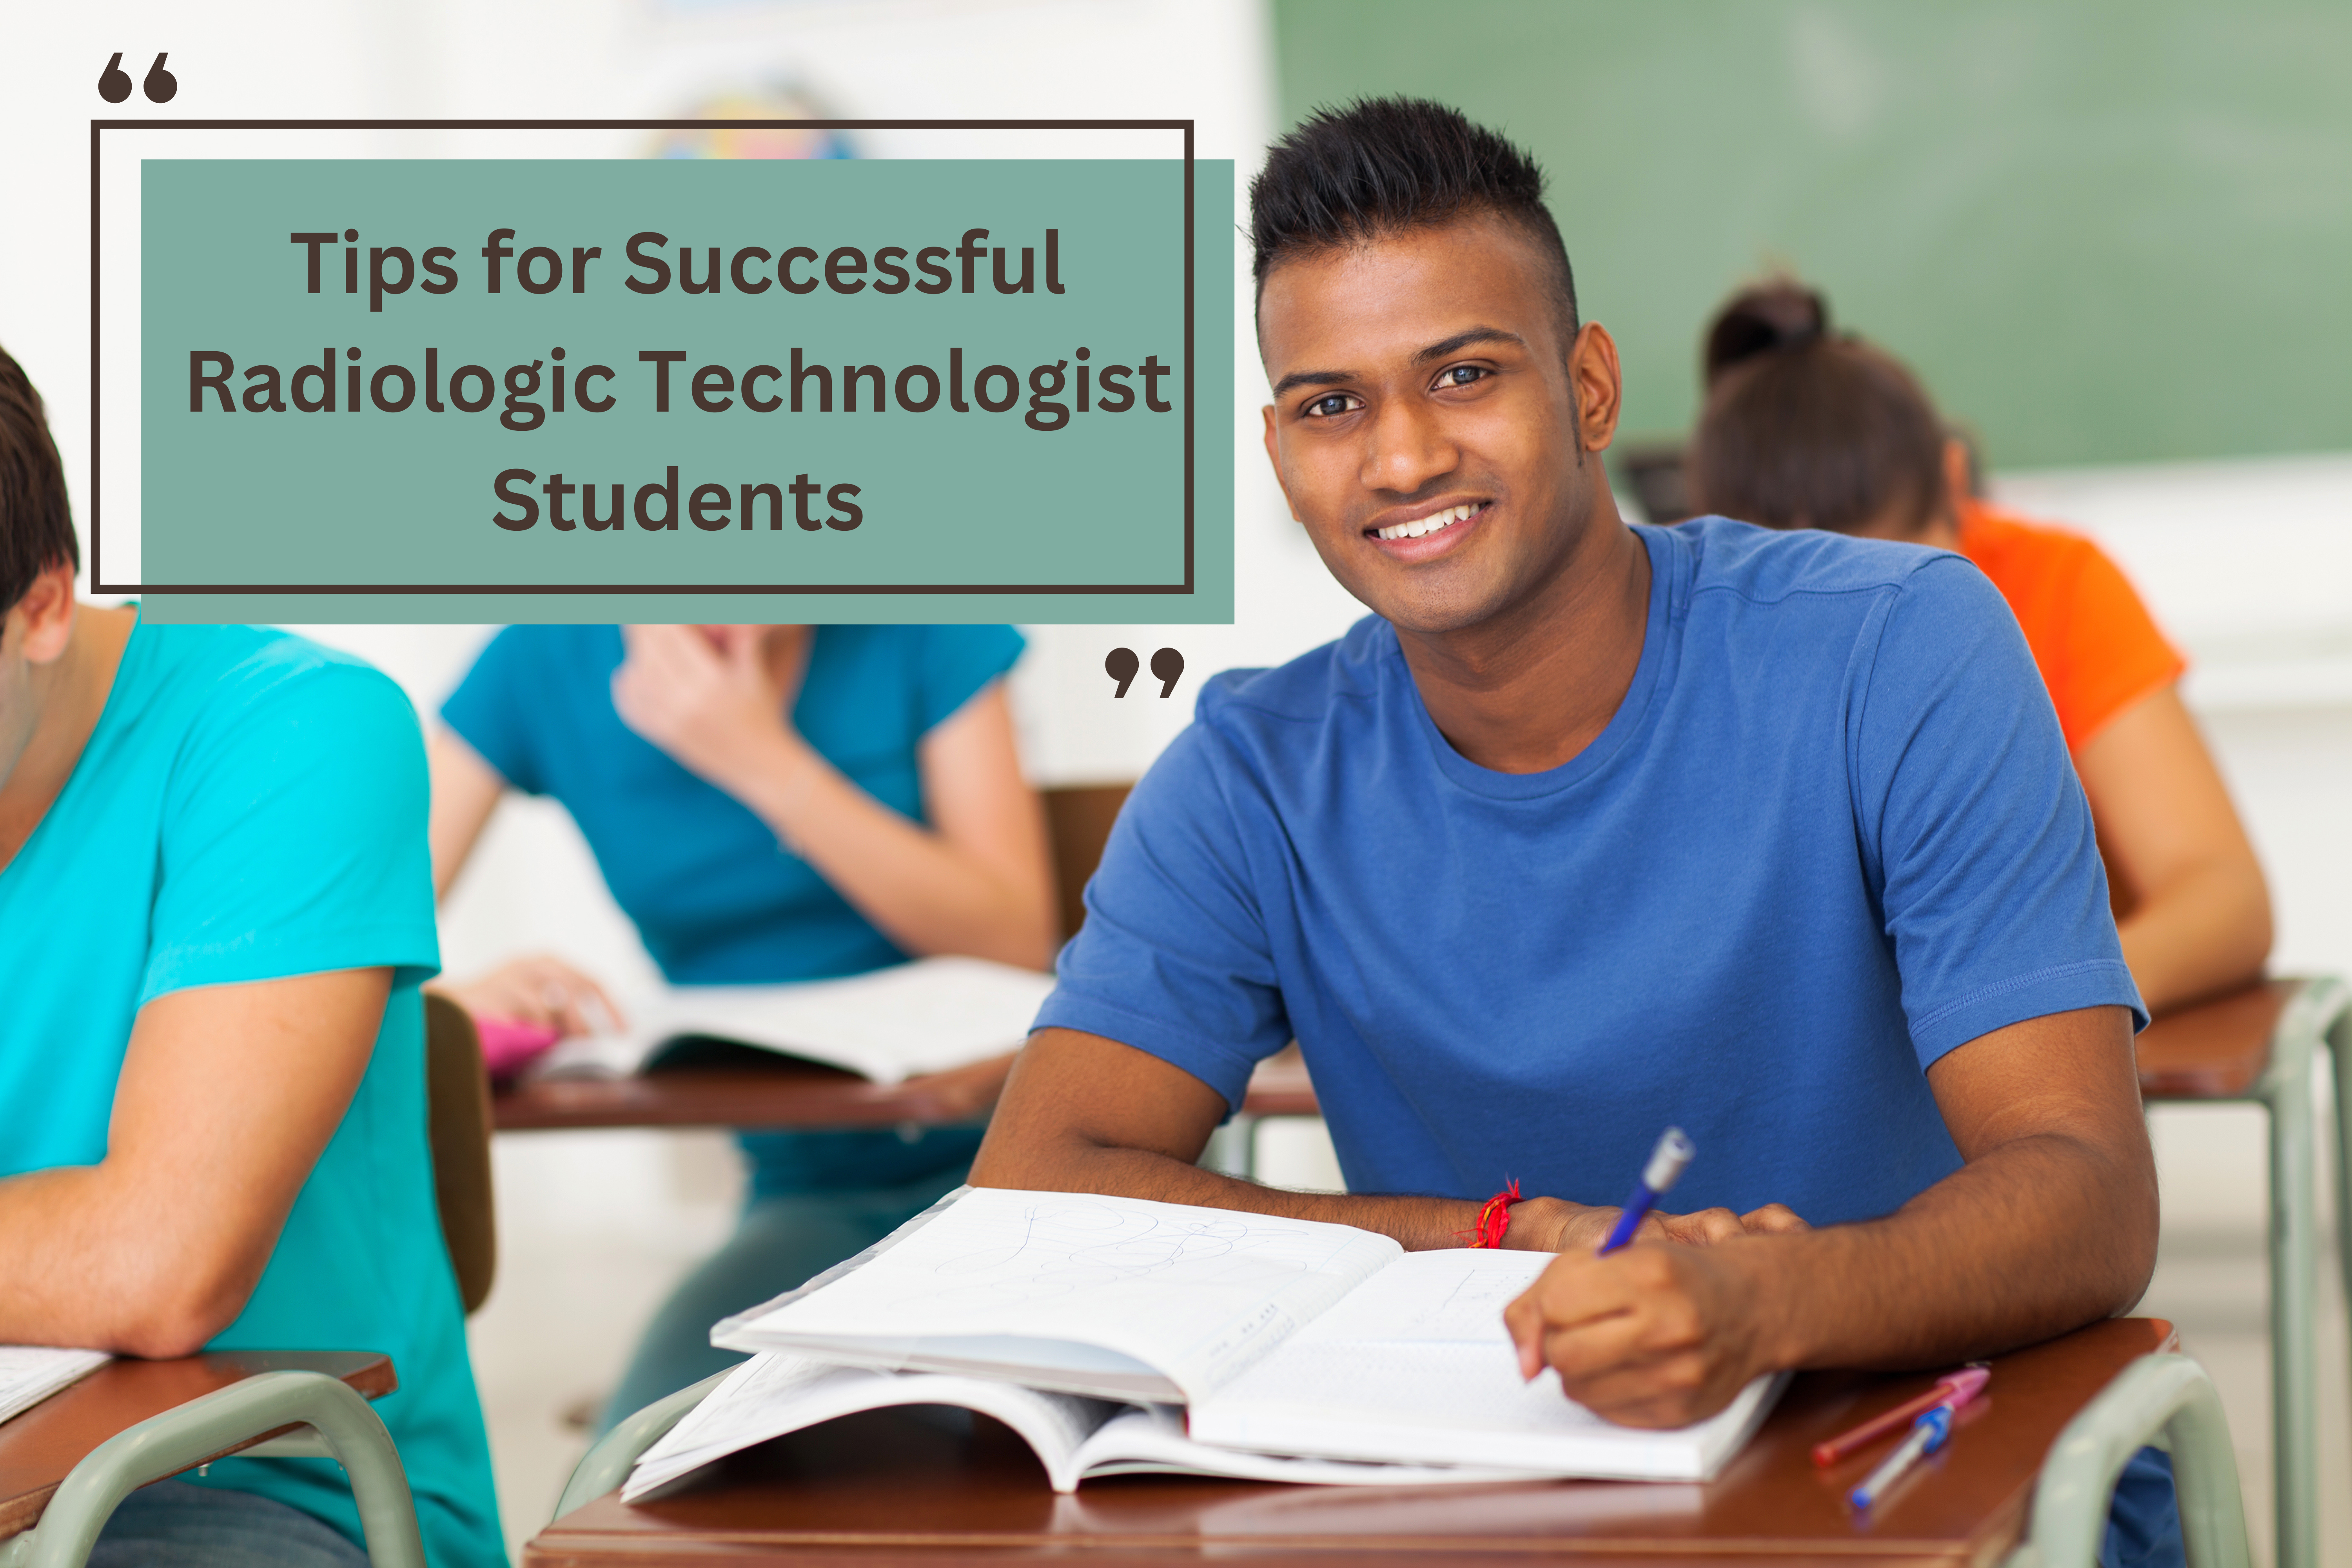 Tips for Successful Radiologic Technologist Students